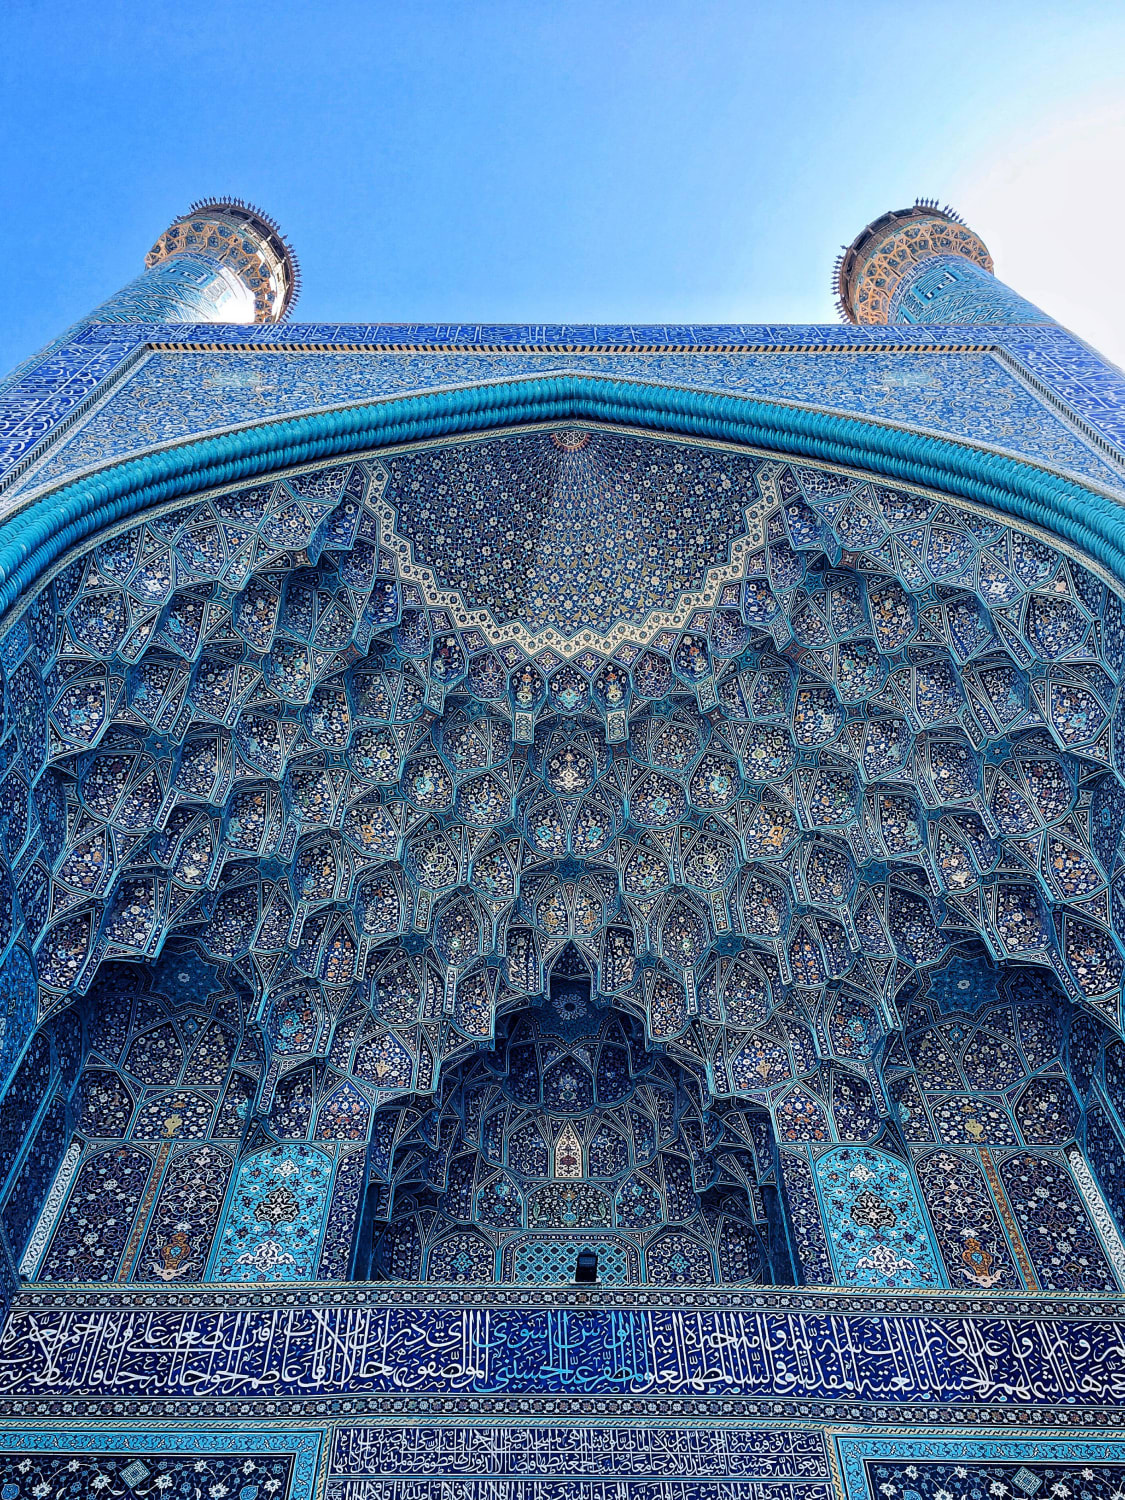 ITAP of Imam Mosque in Isfahan, Iran